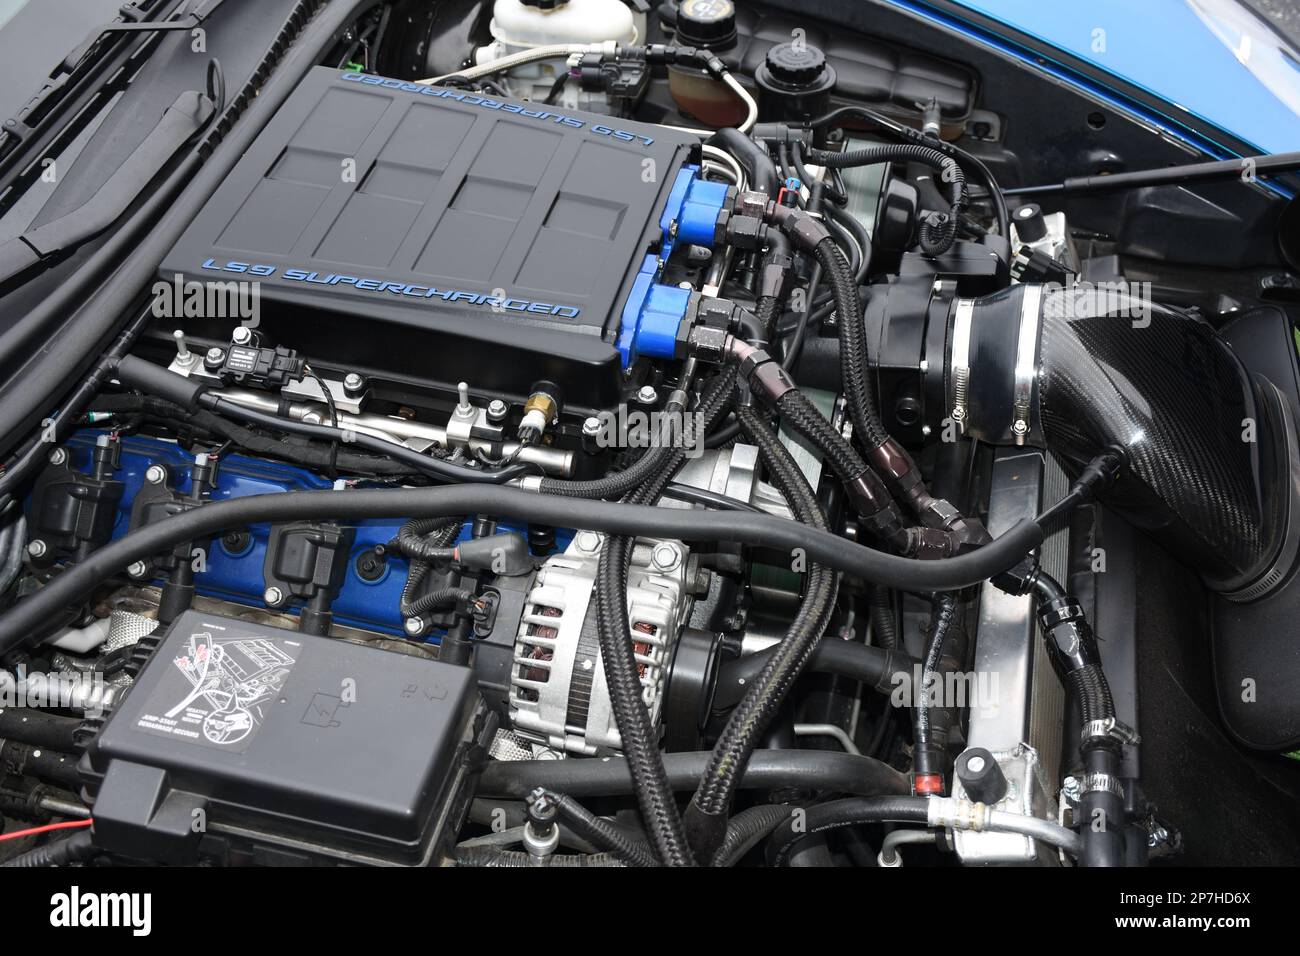 The LS9 Engine in a ZR1 Supercharged Corvette on display at a car show. Stock Photo